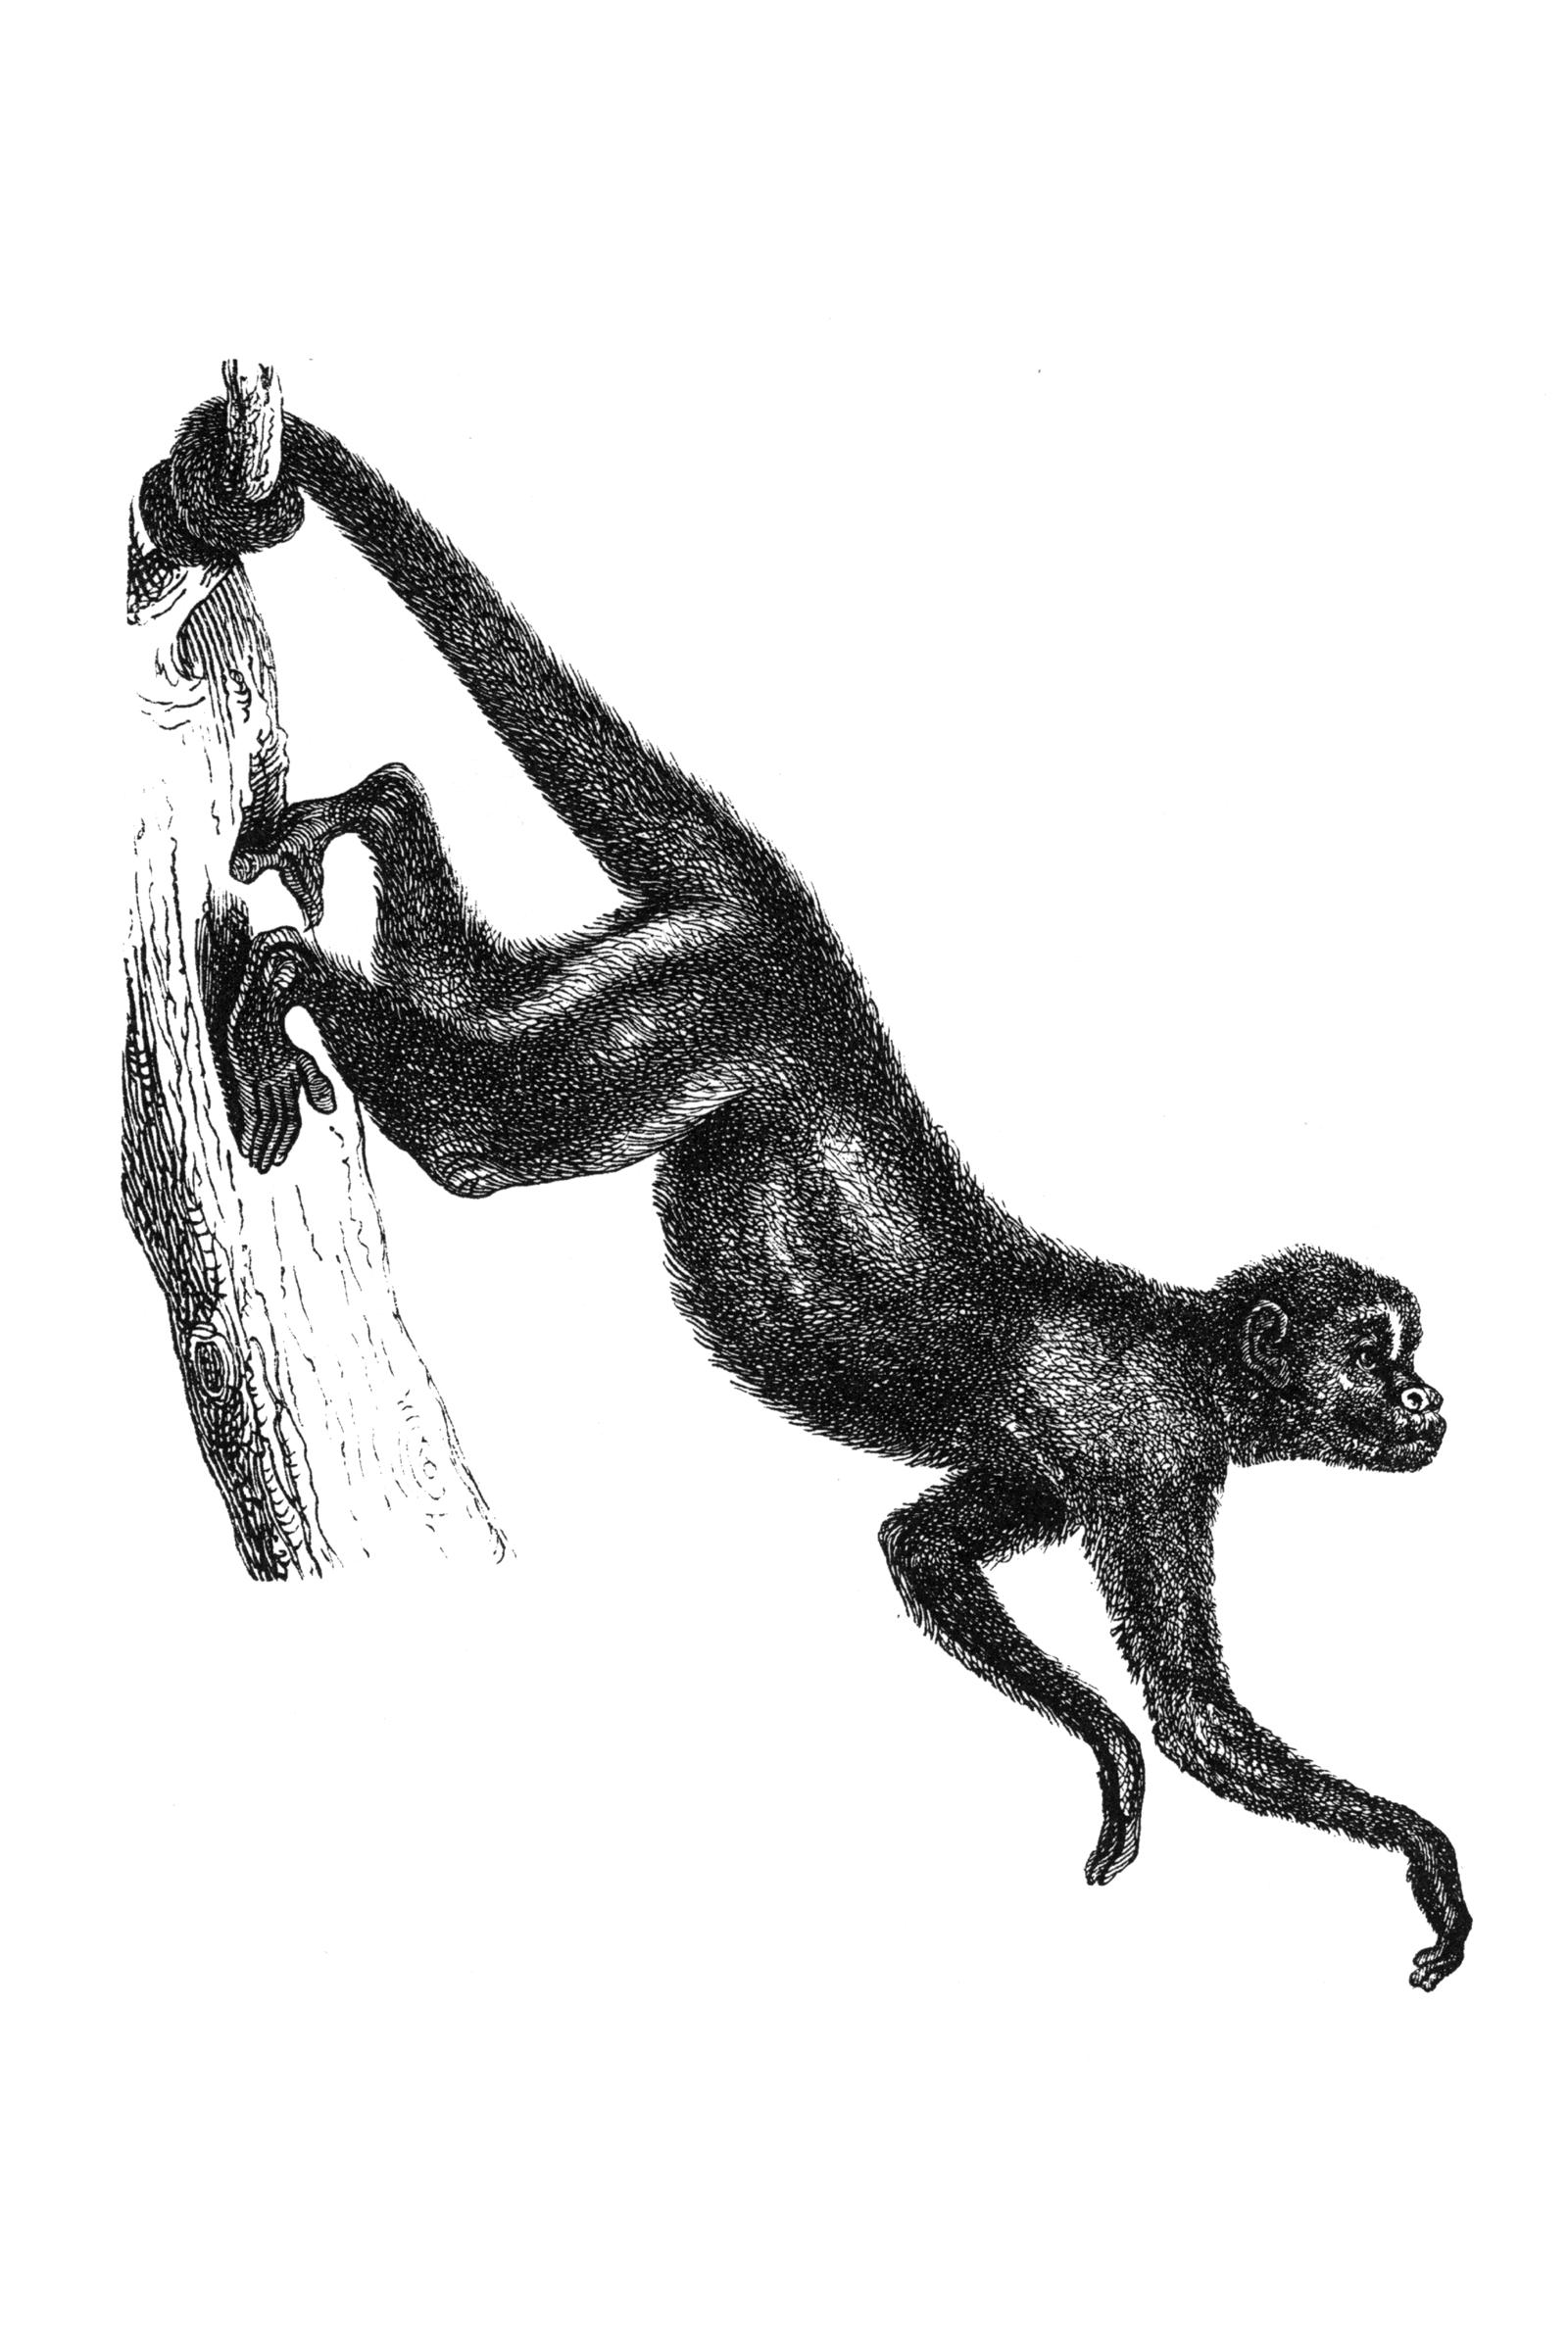 File:Macaco-Aranha (Red-Faced Spider Monkey)2.jpg - Wikimedia Commons